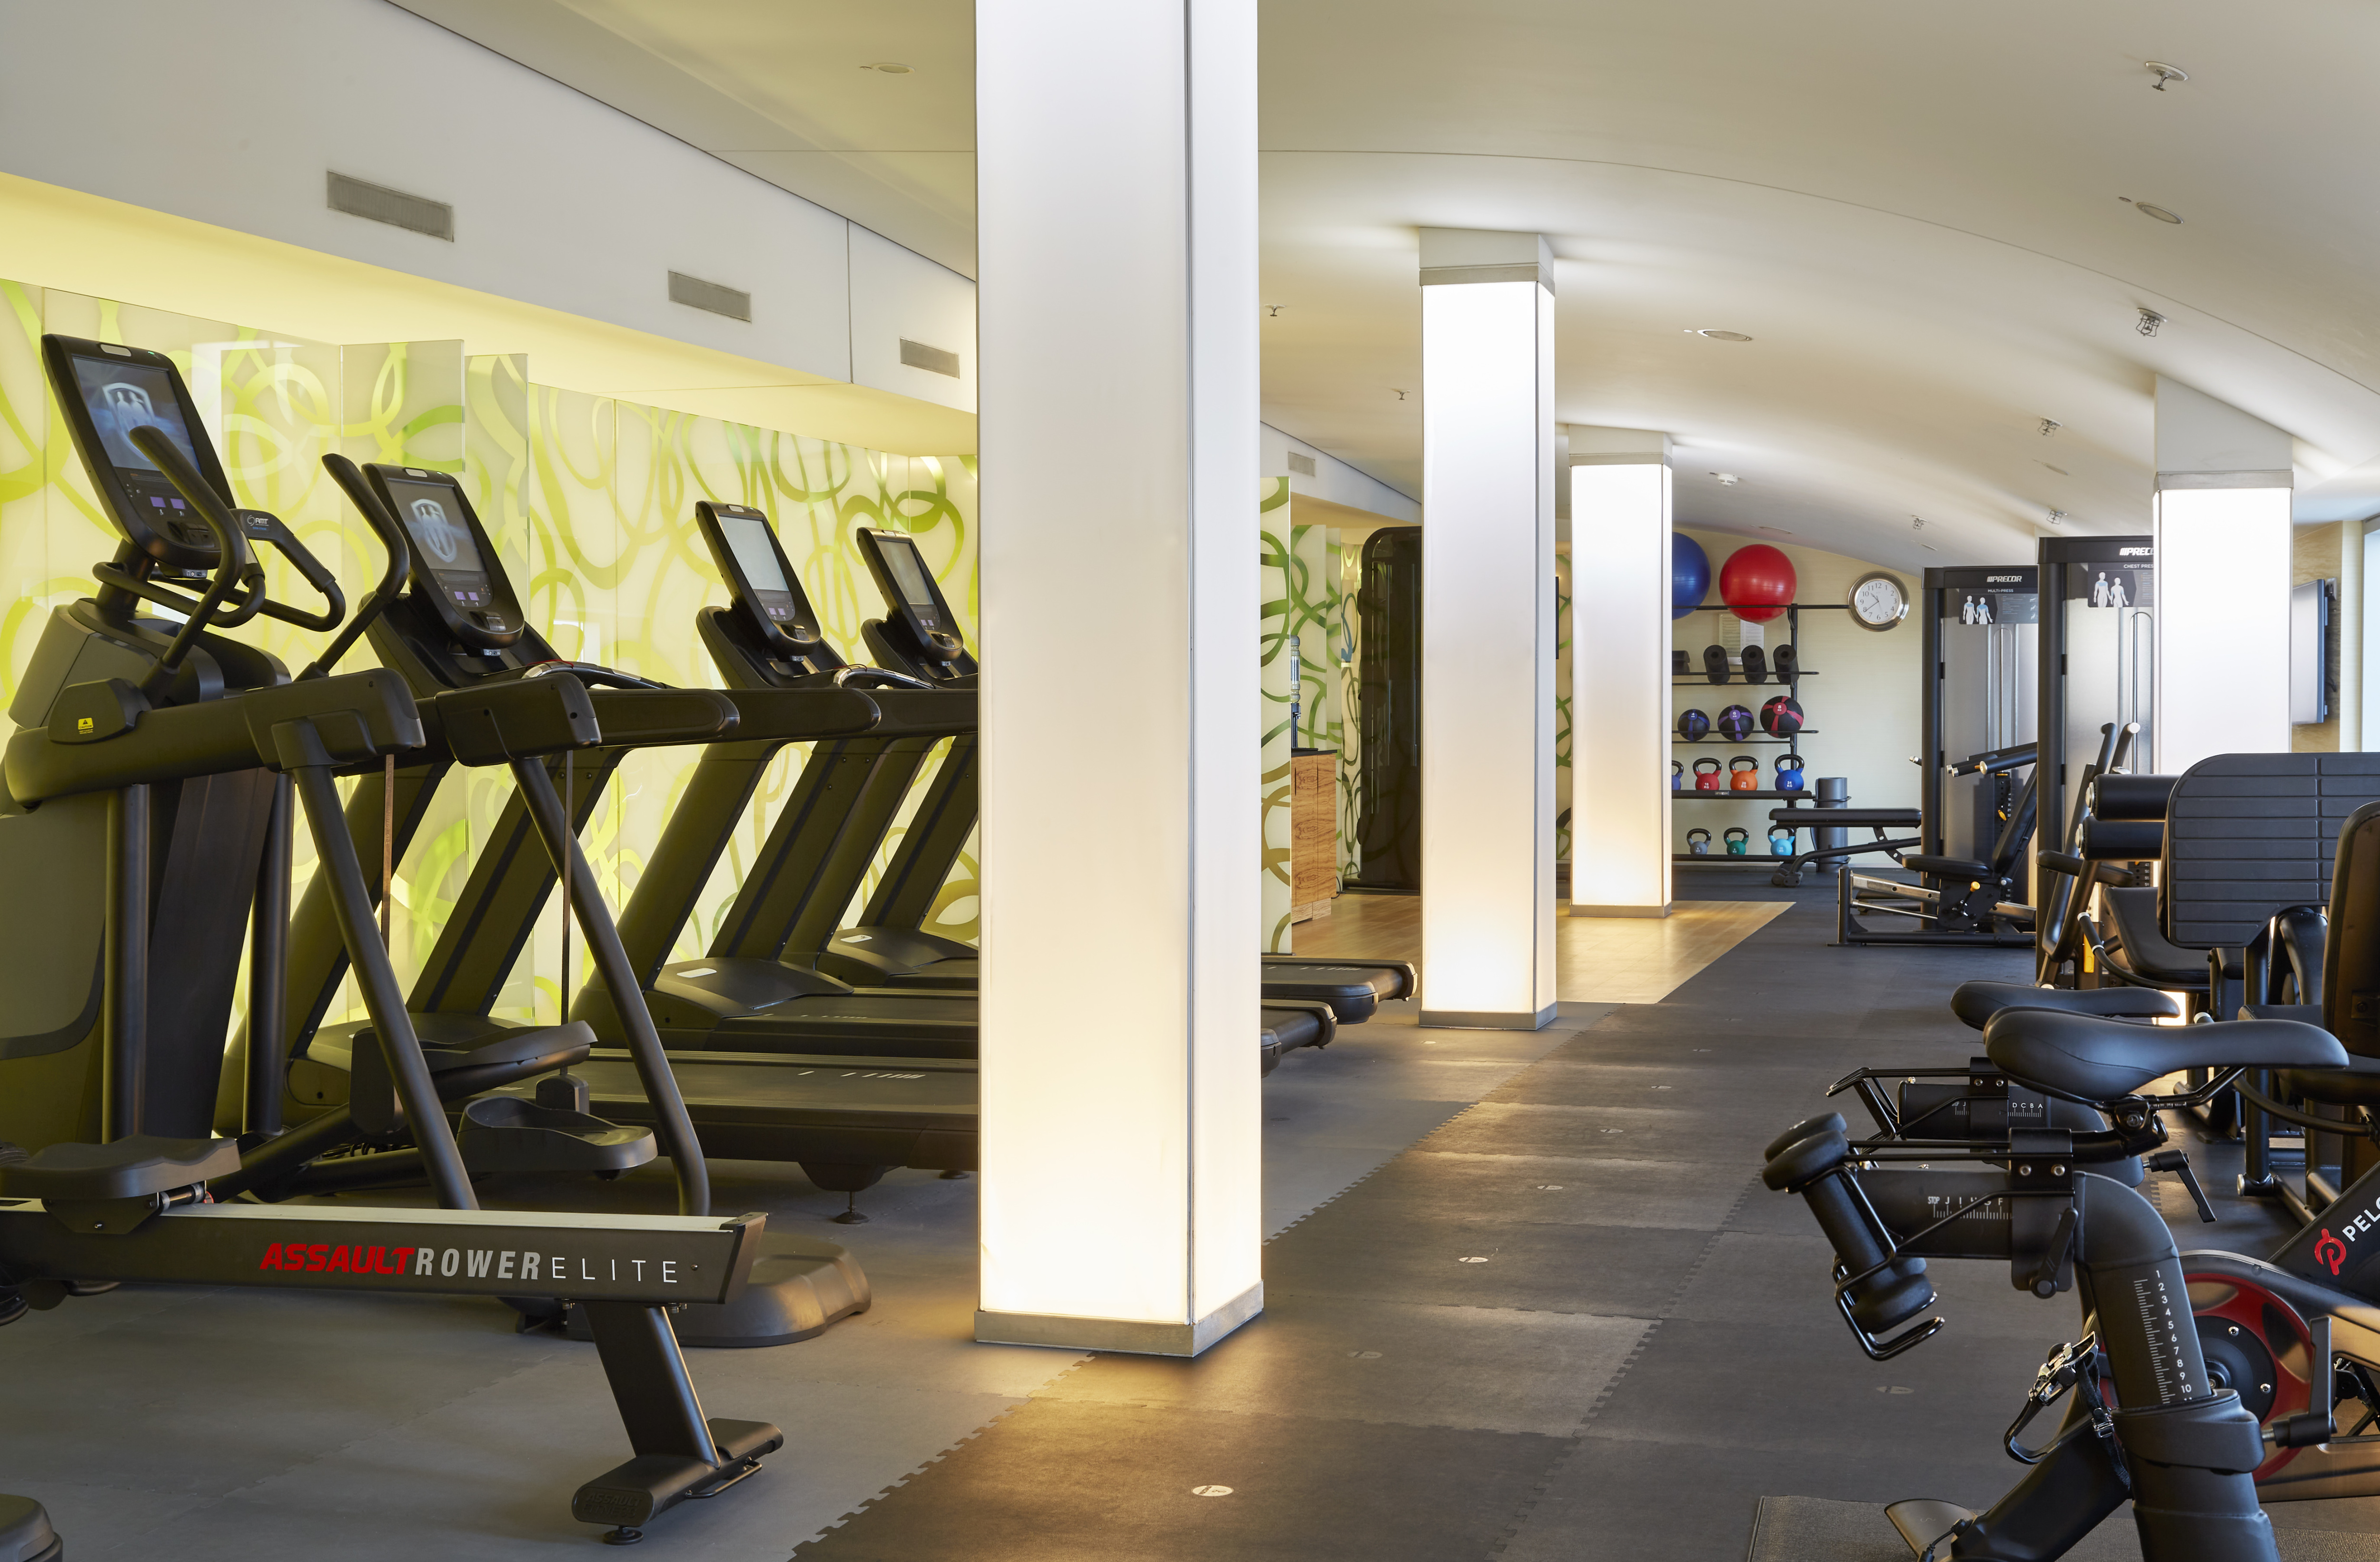 Treadmills and other Exercise Equipment in Fitness Center